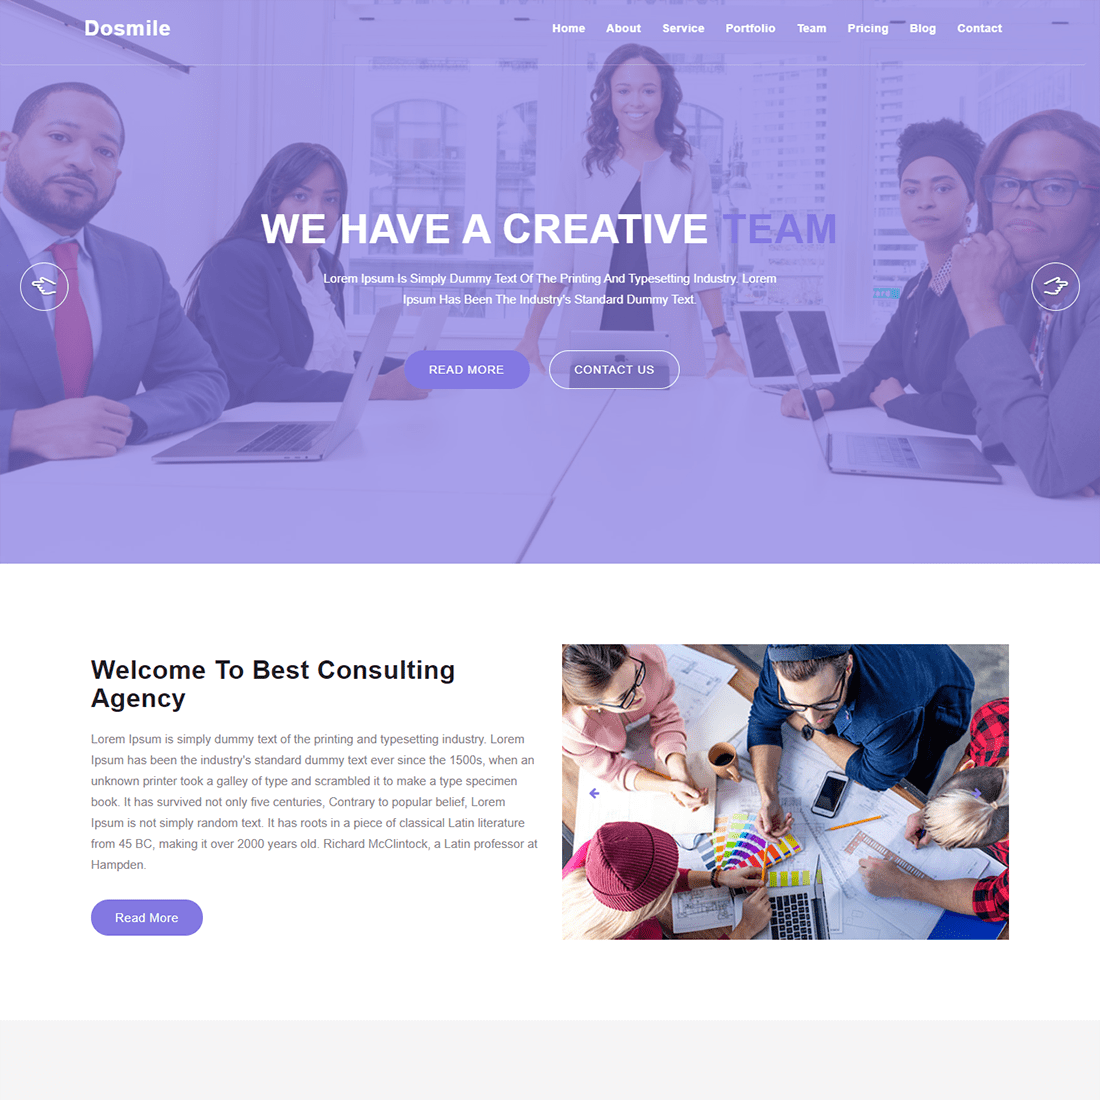 Consulting & Business HTML Template cover image.